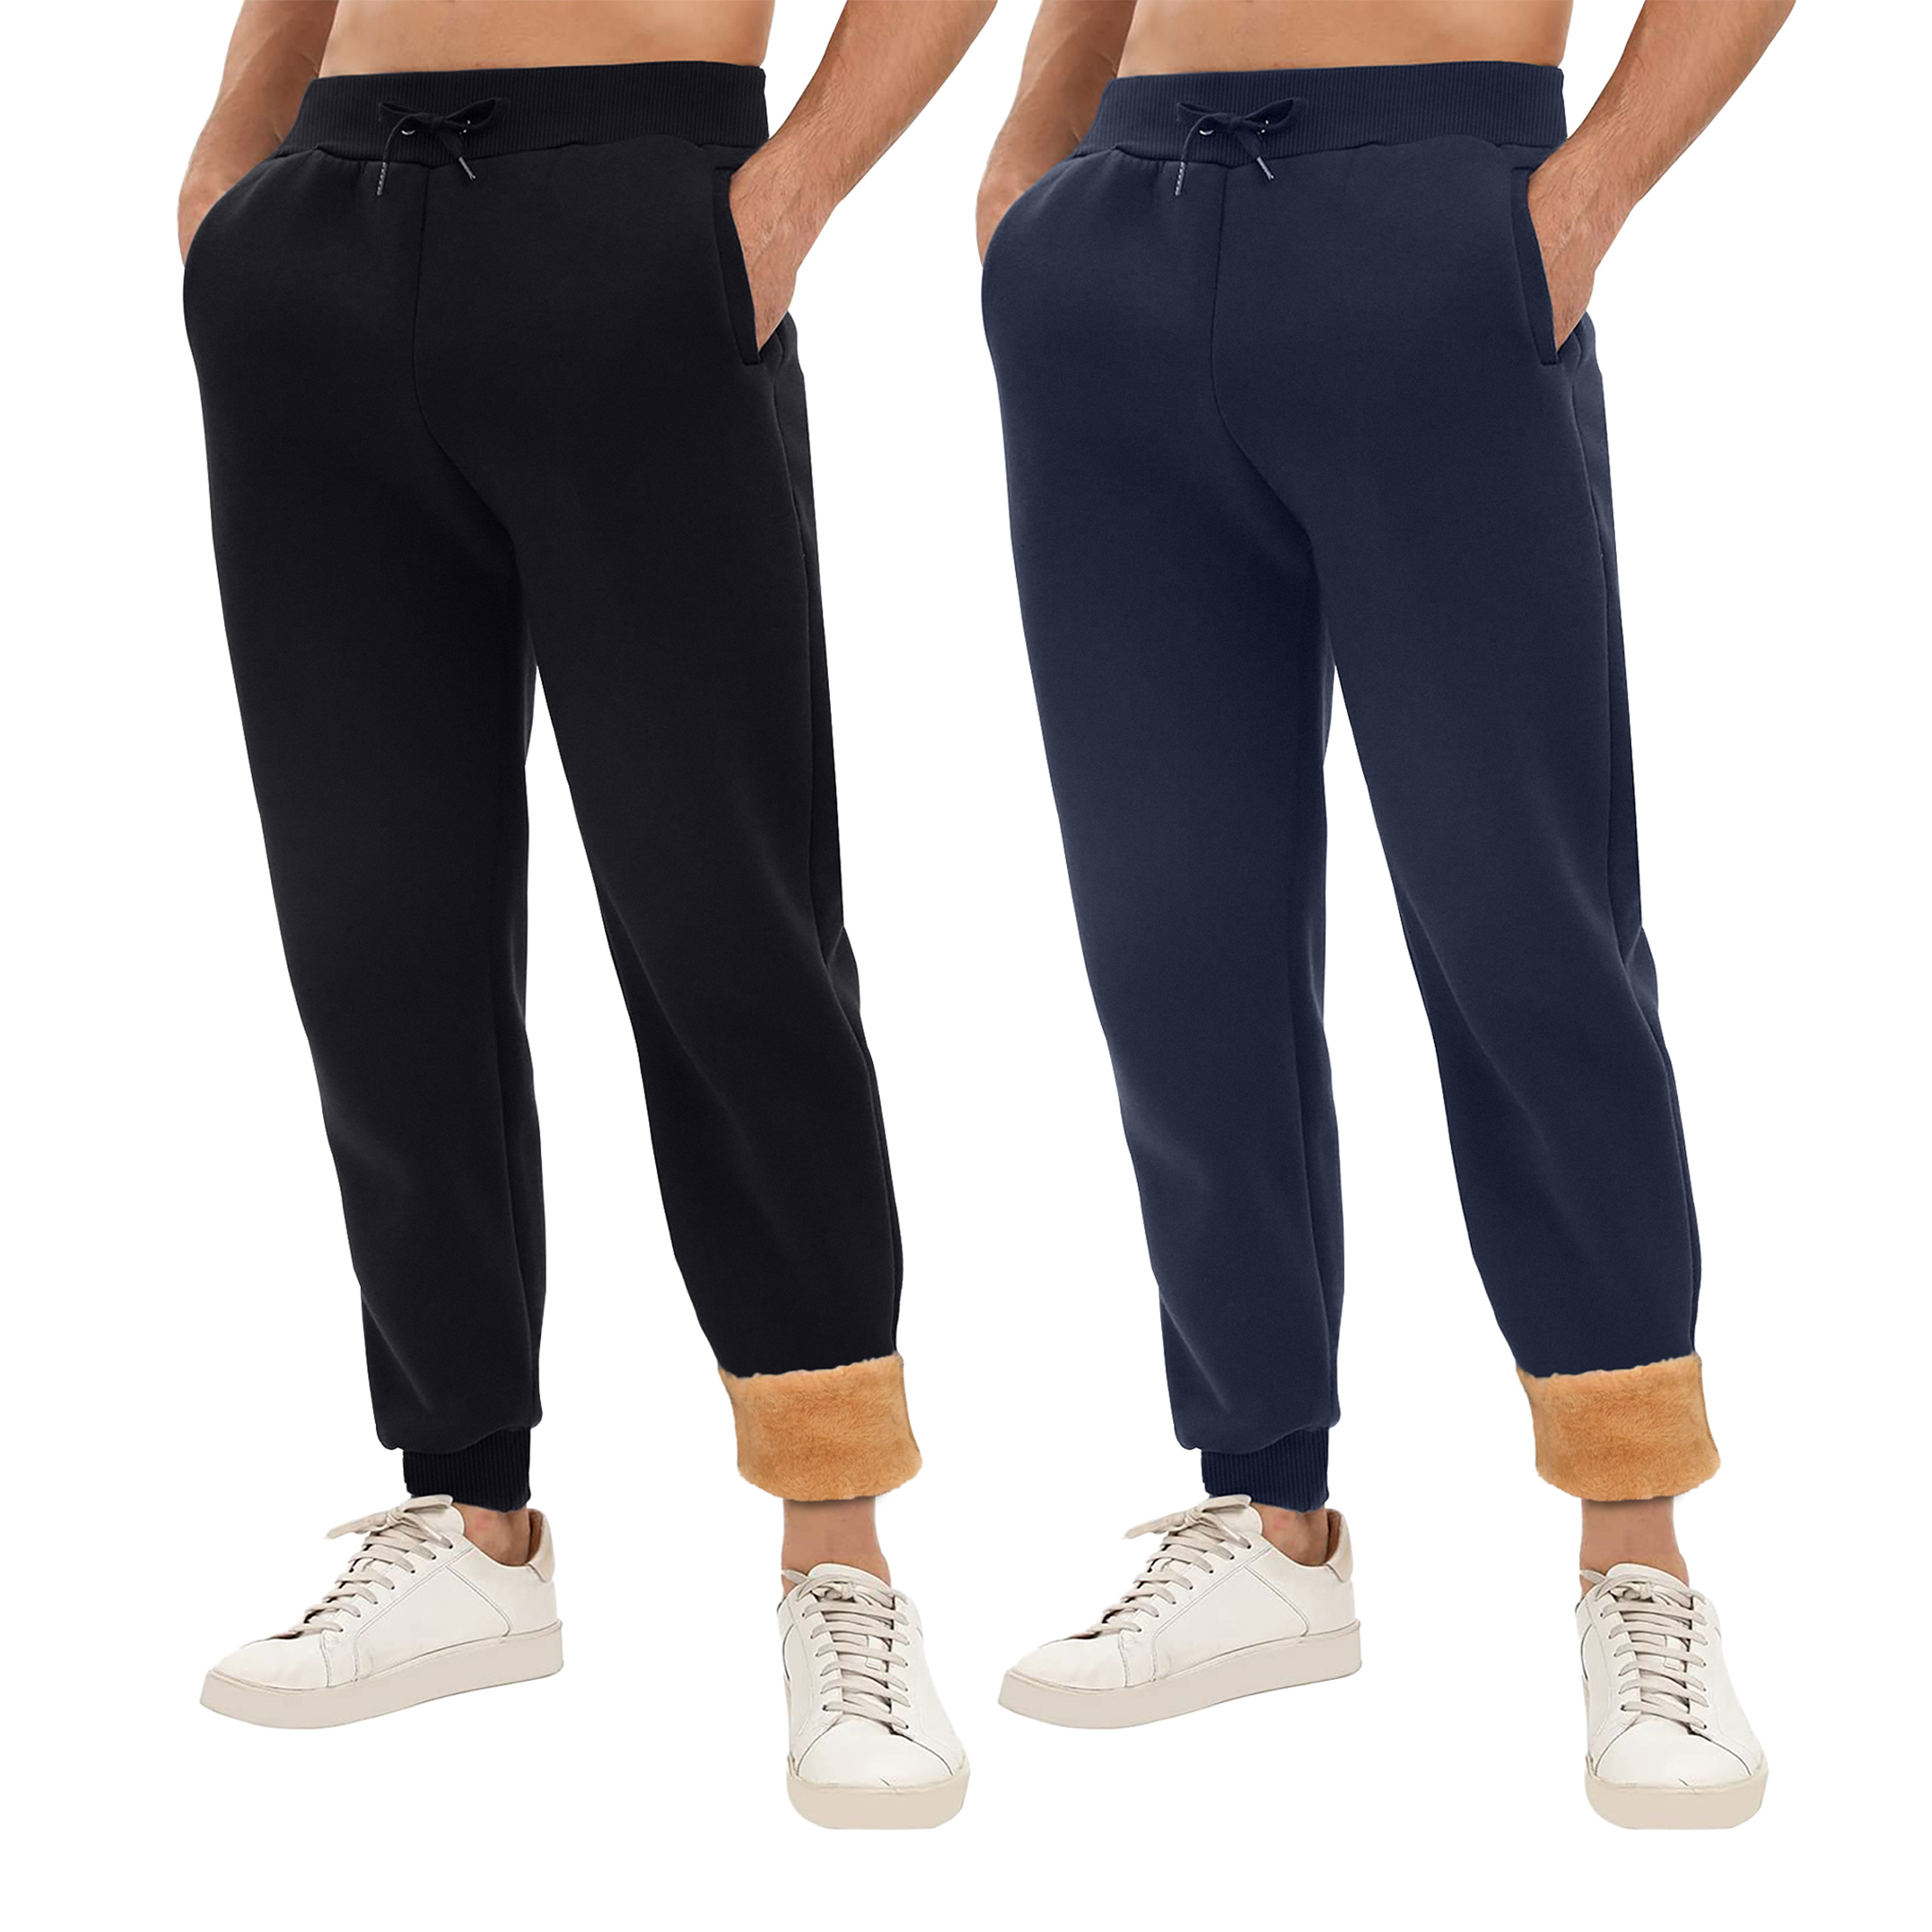 2-Pack: Men's Winter Warm Thick Sherpa Lined Jogger Track Pants With Pockets - Black & Navy, Small